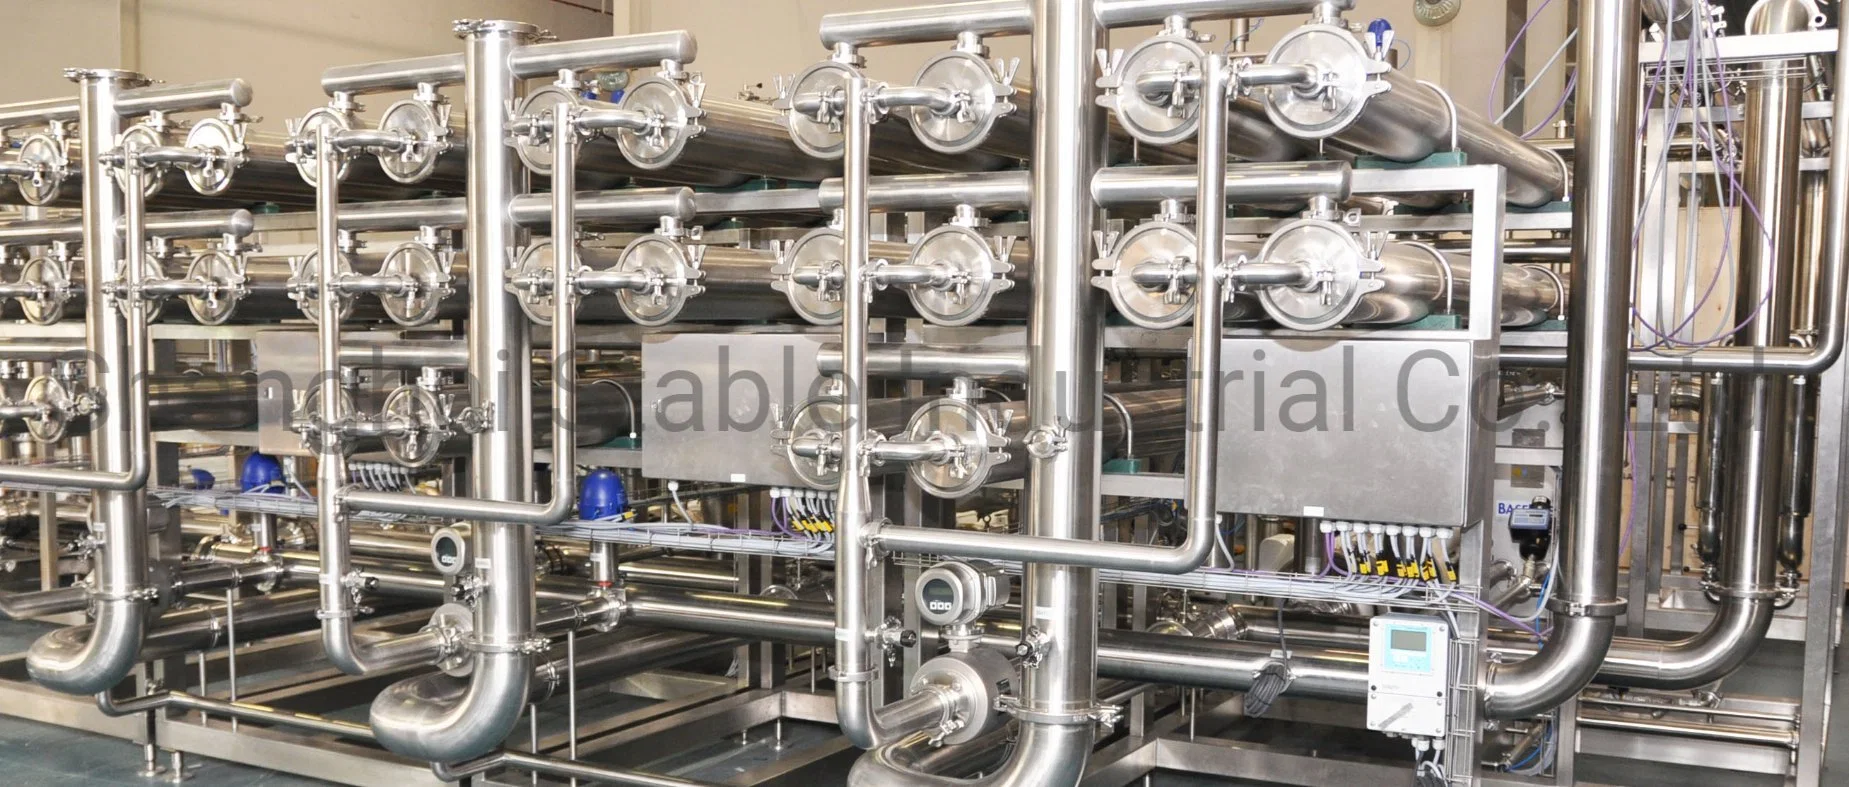 Membrane Application for Dairy Products